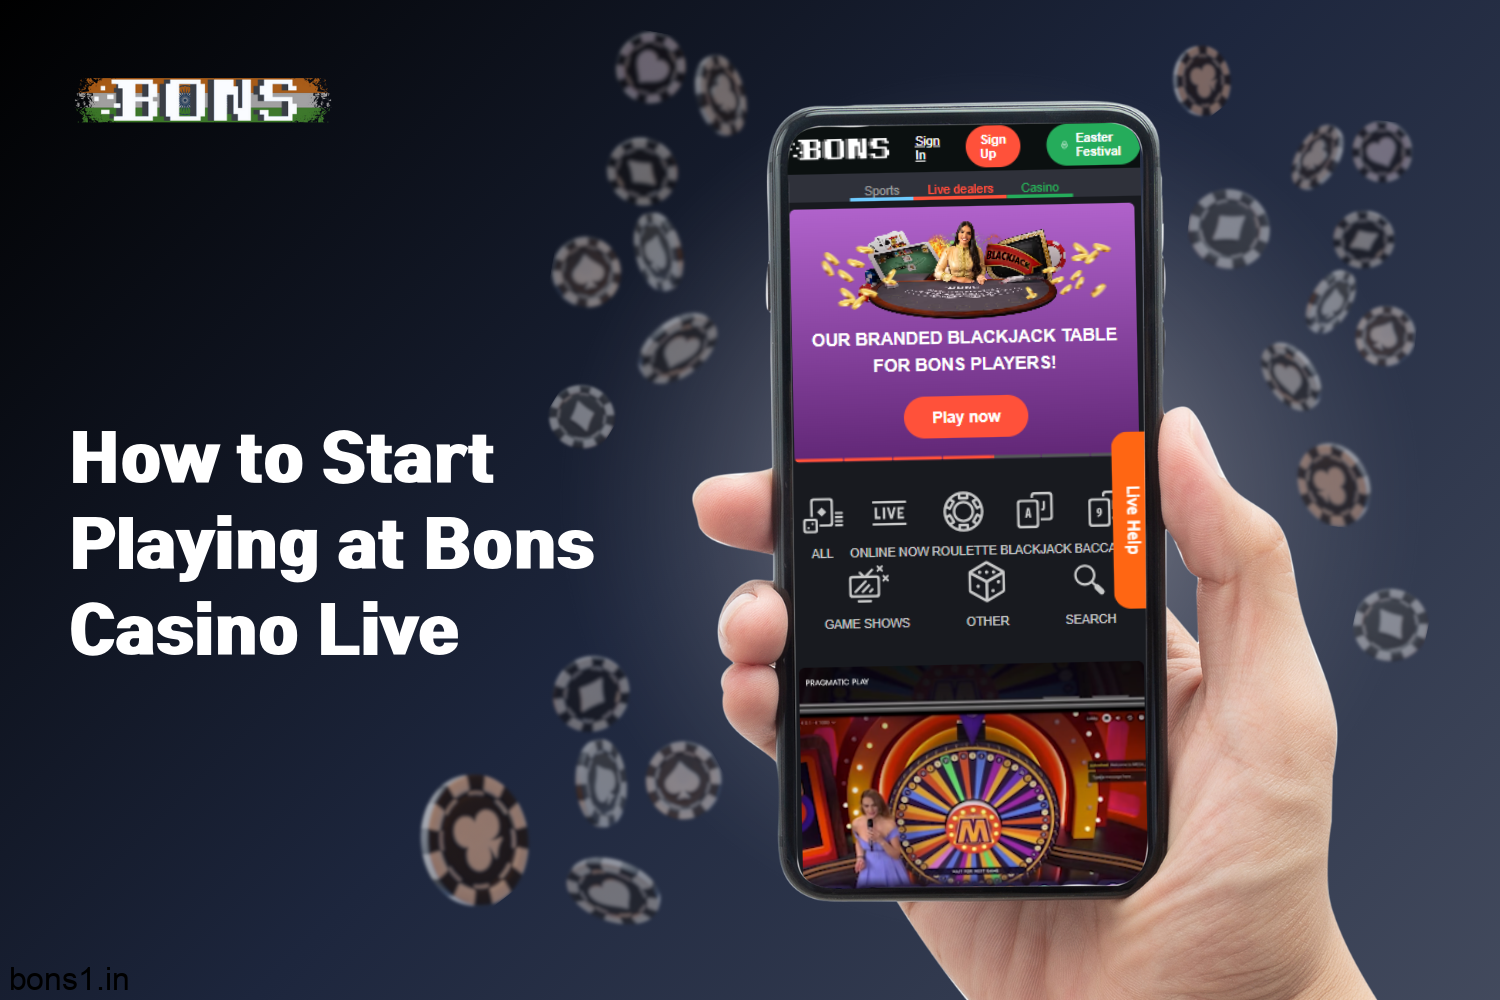 How Indian players can start playing at bons live casino on the Bons website